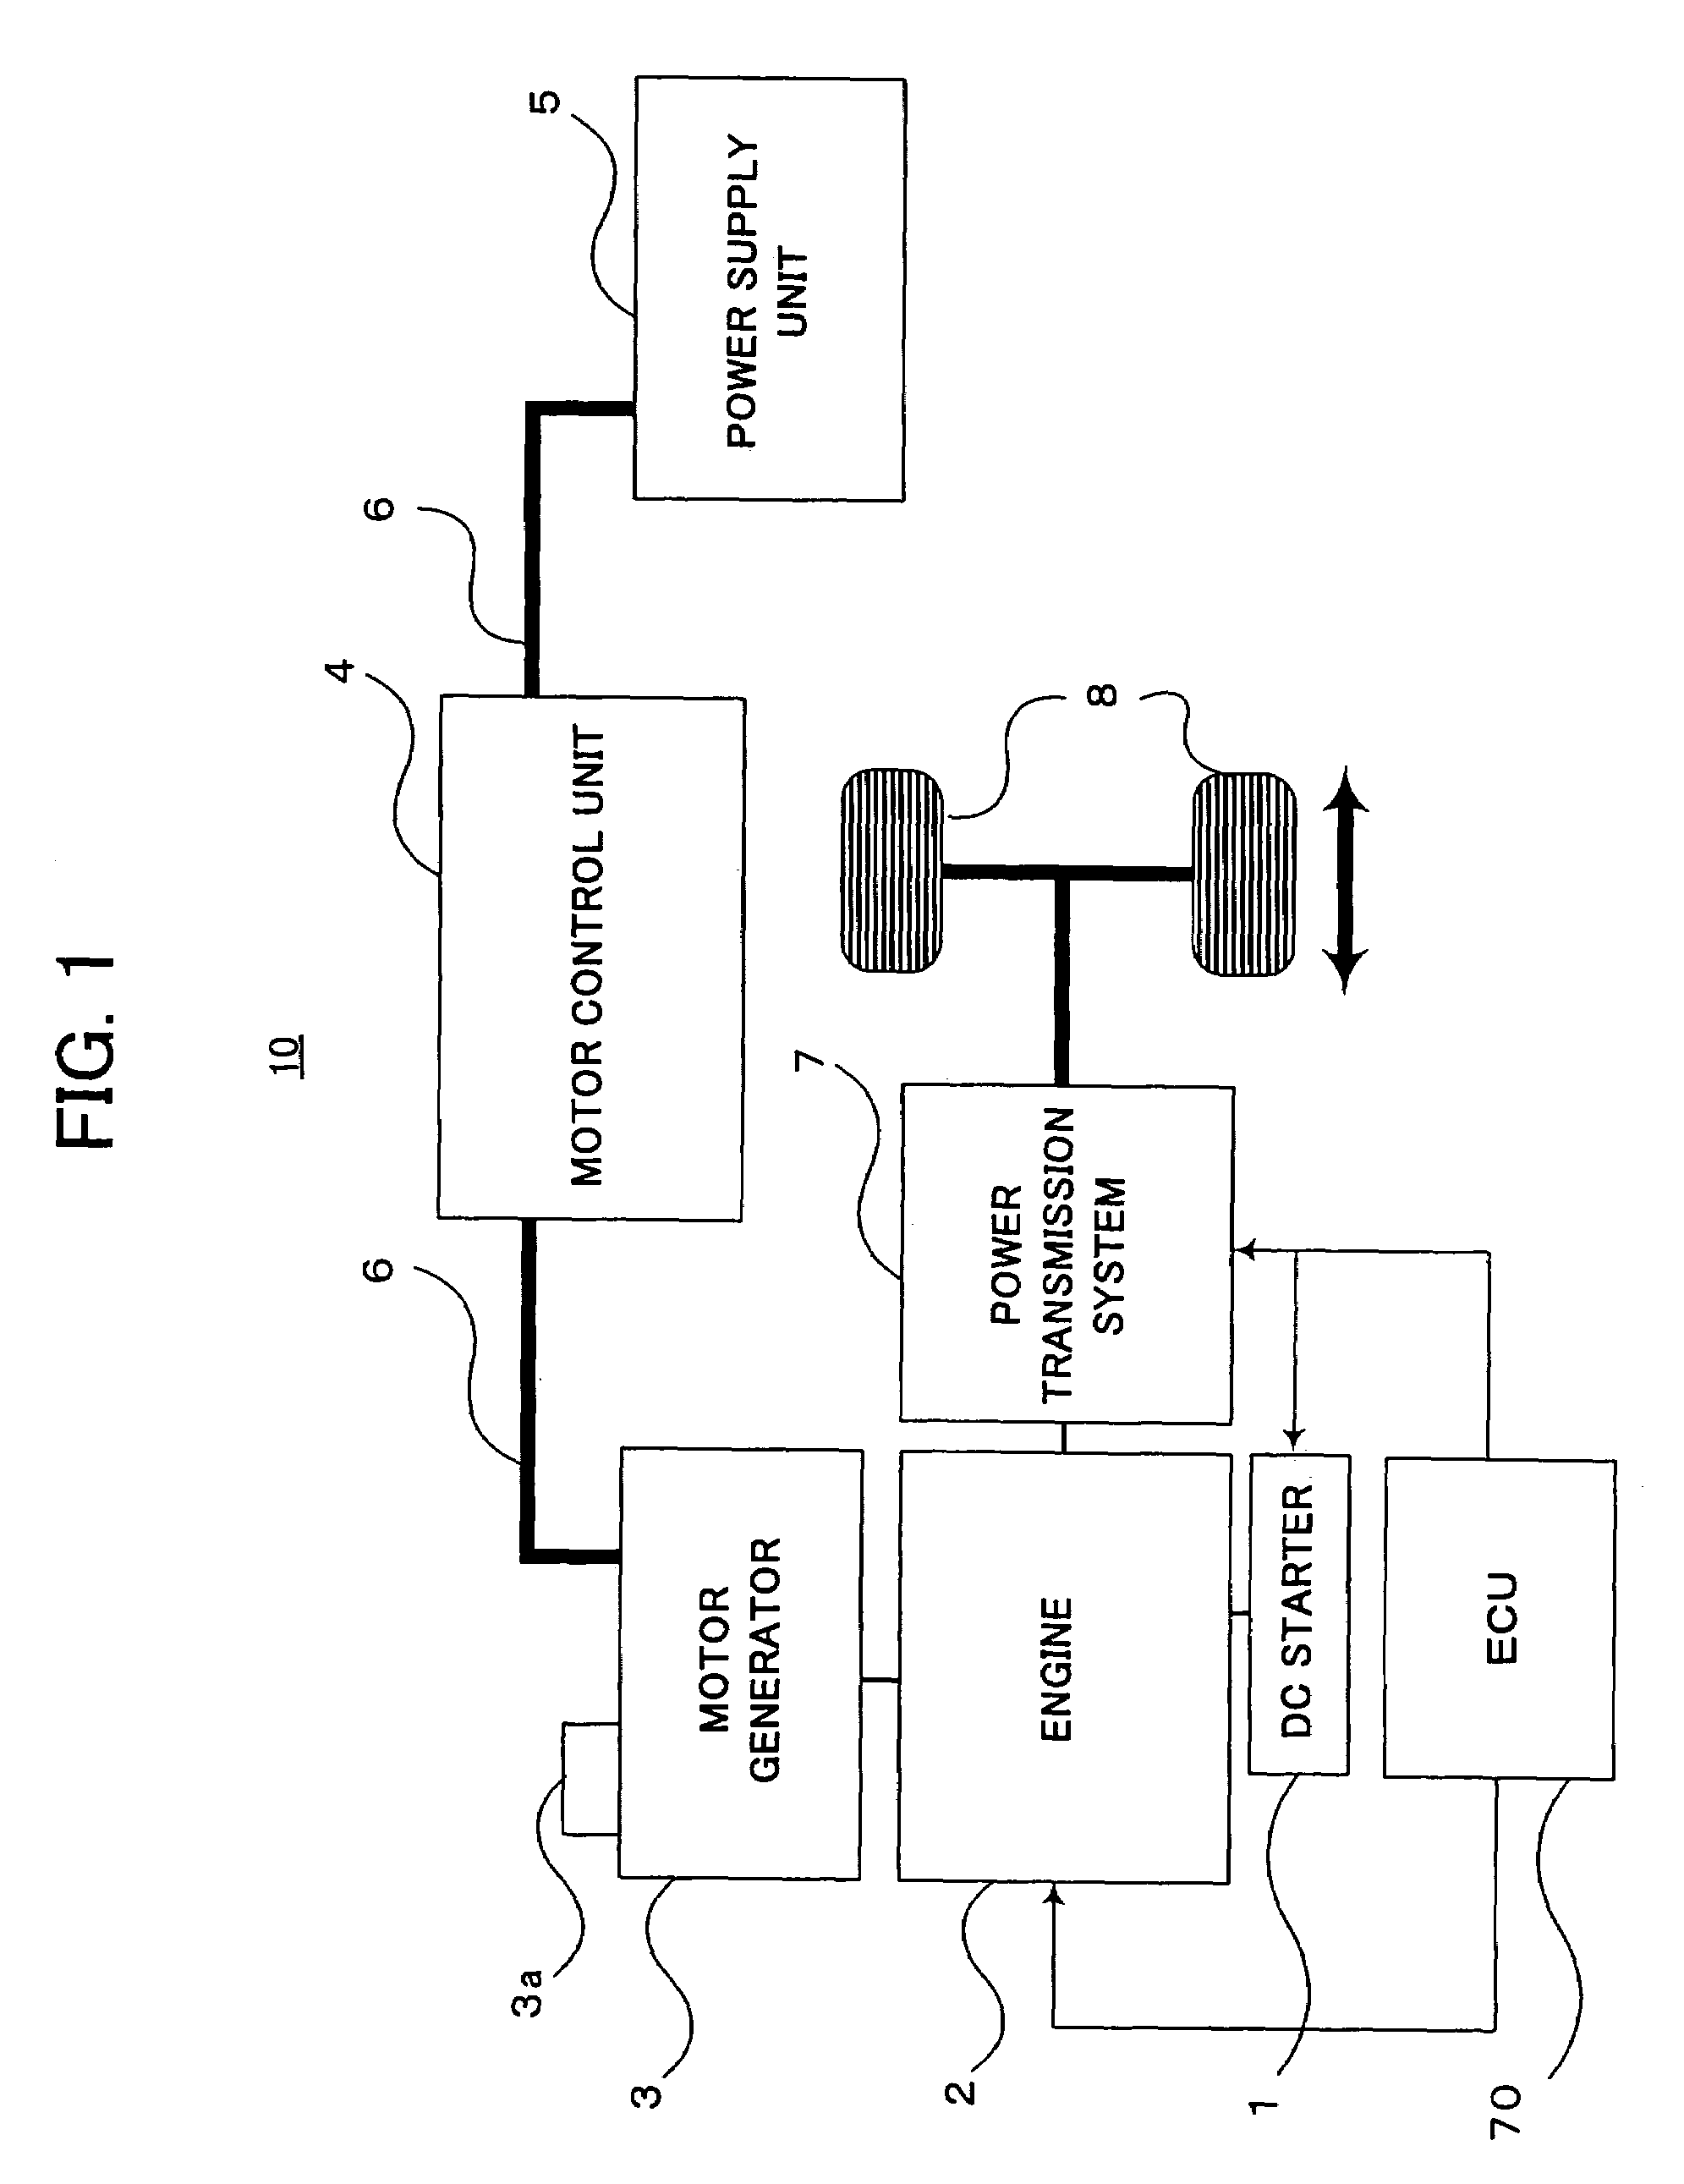 Stop position estimating apparatus of internal combustion engine